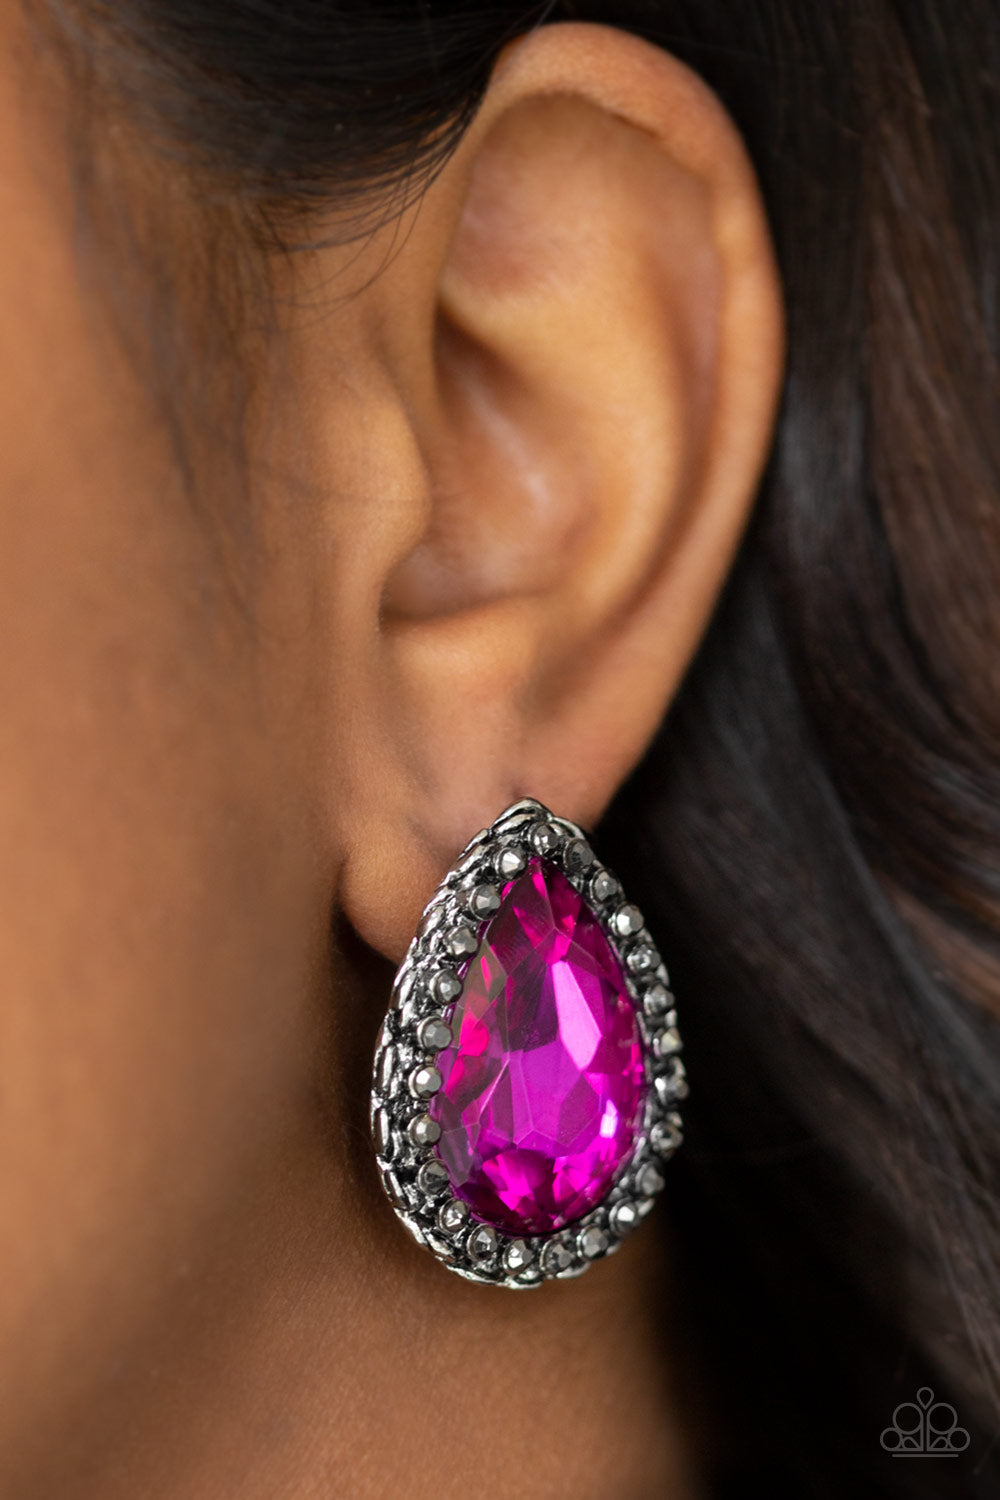 Dare To Shine - Pink Item #E427 Encrusted in a ring of glittery hematite rhinestones, an overly dramatic pink teardrop gem is pressed into a textured silver frame for a grunge-glamorous look. Earring attaches to a standard post fitting. All Paparazzi Accessories are lead free and nickel free!  Sold as one pair of post earrings.